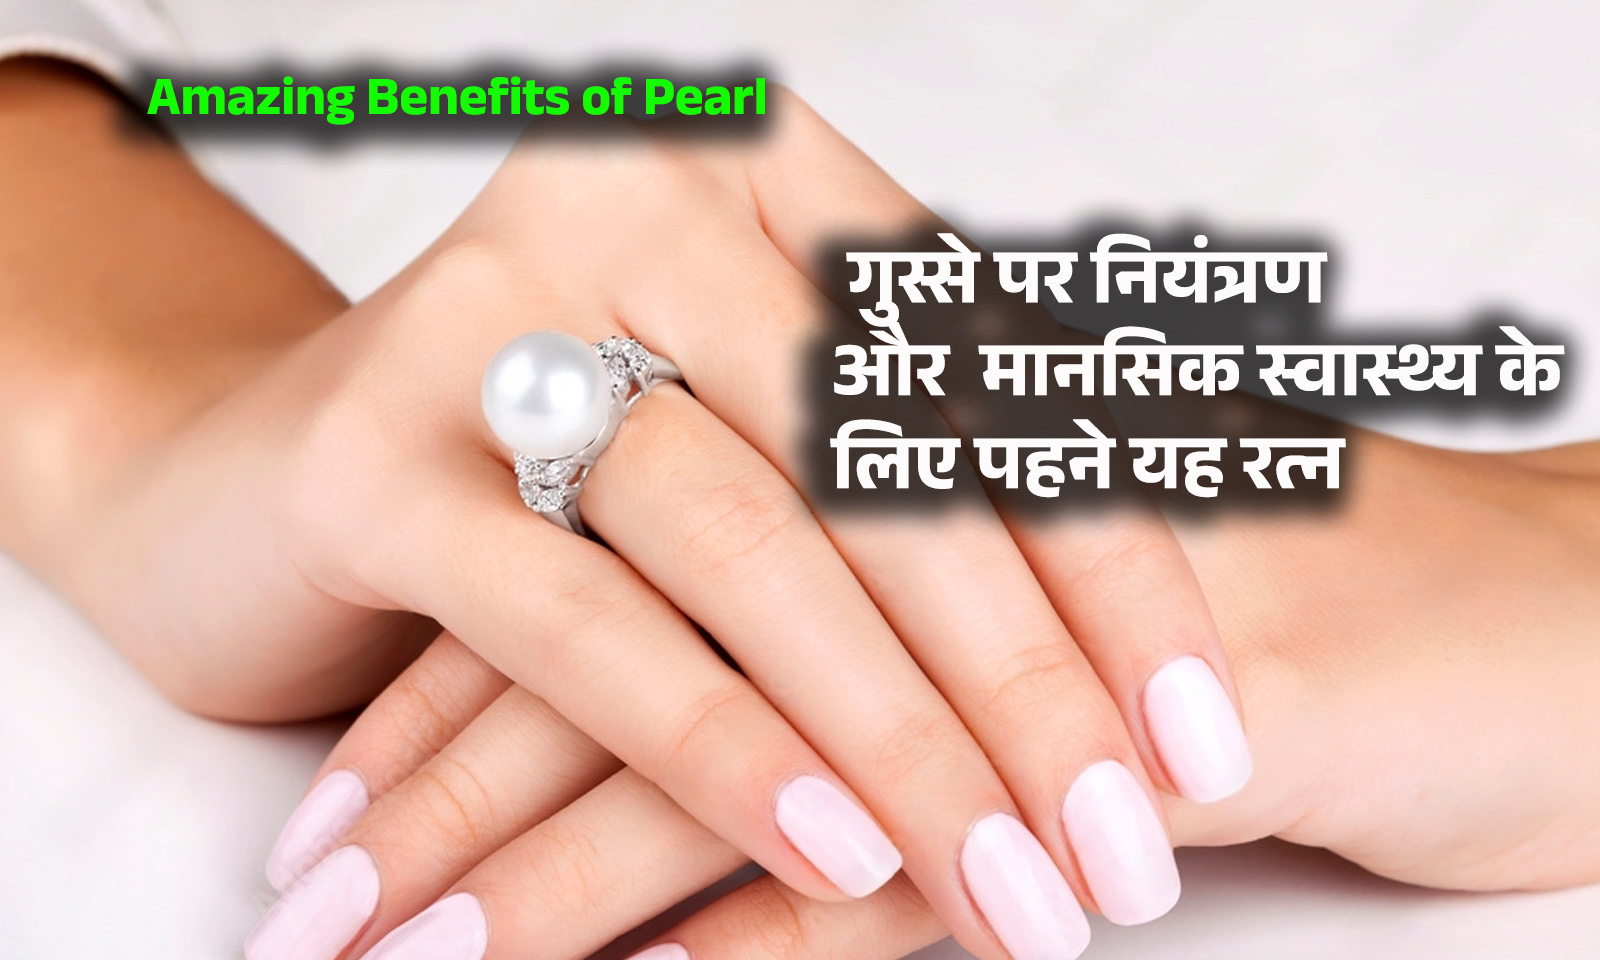 Pearl gems? The method and benefits of wearing pearl gems